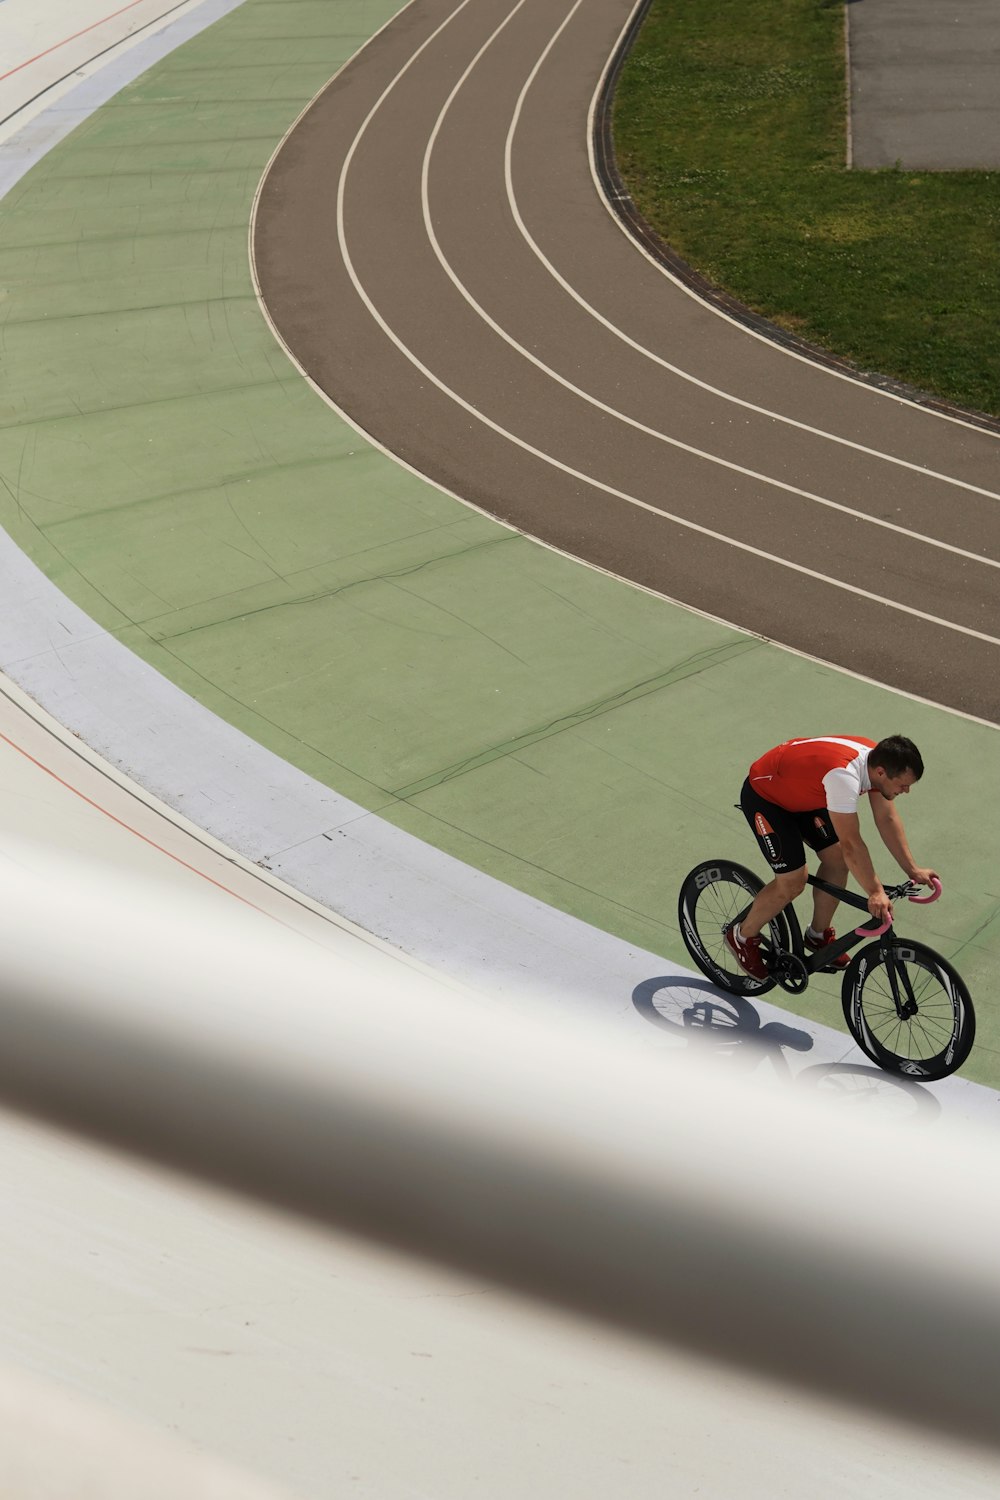 boy in red shirt riding bicycle on track field during daytime